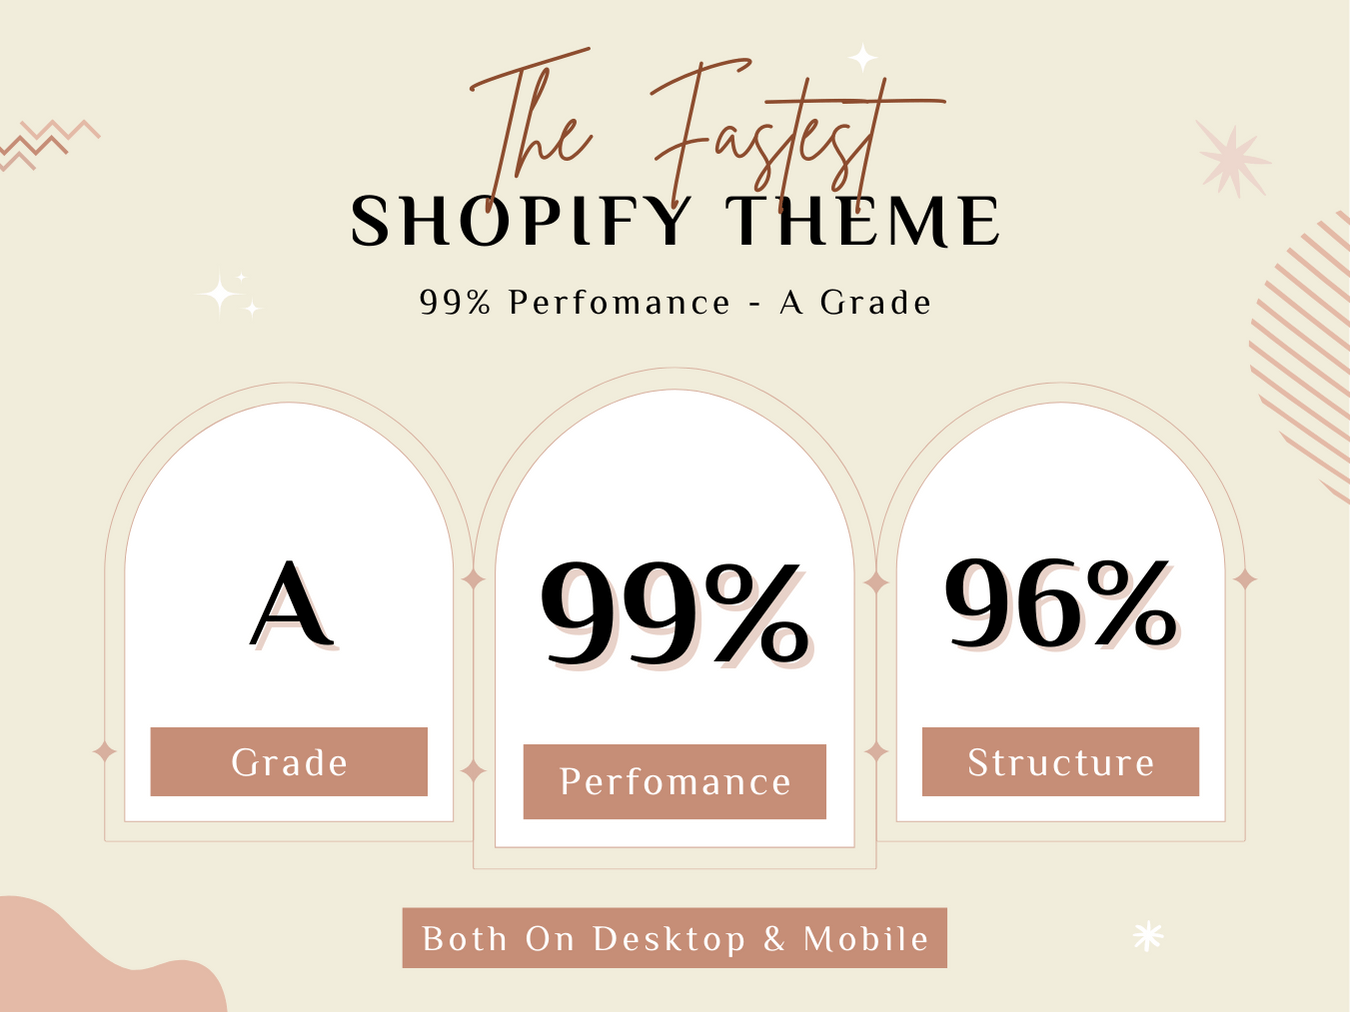 PAW - Best Shopify Pet Themes Store | OS 2.0